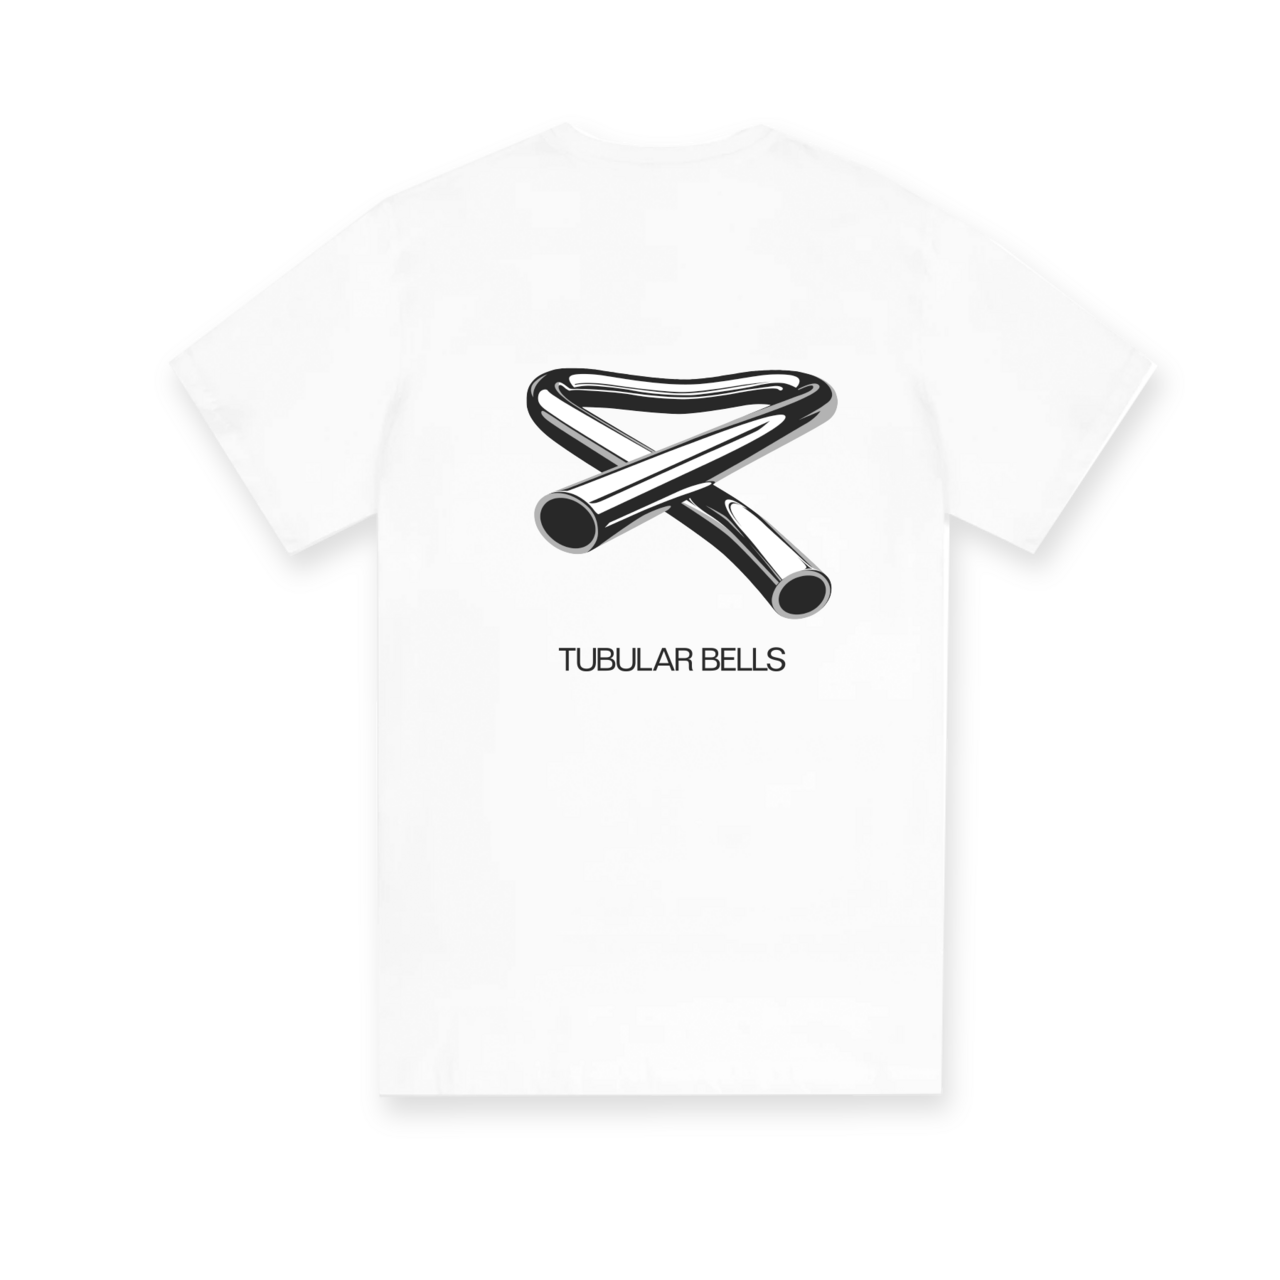 Mike Oldfield - Official Tubular Bells: Classic T-shirt